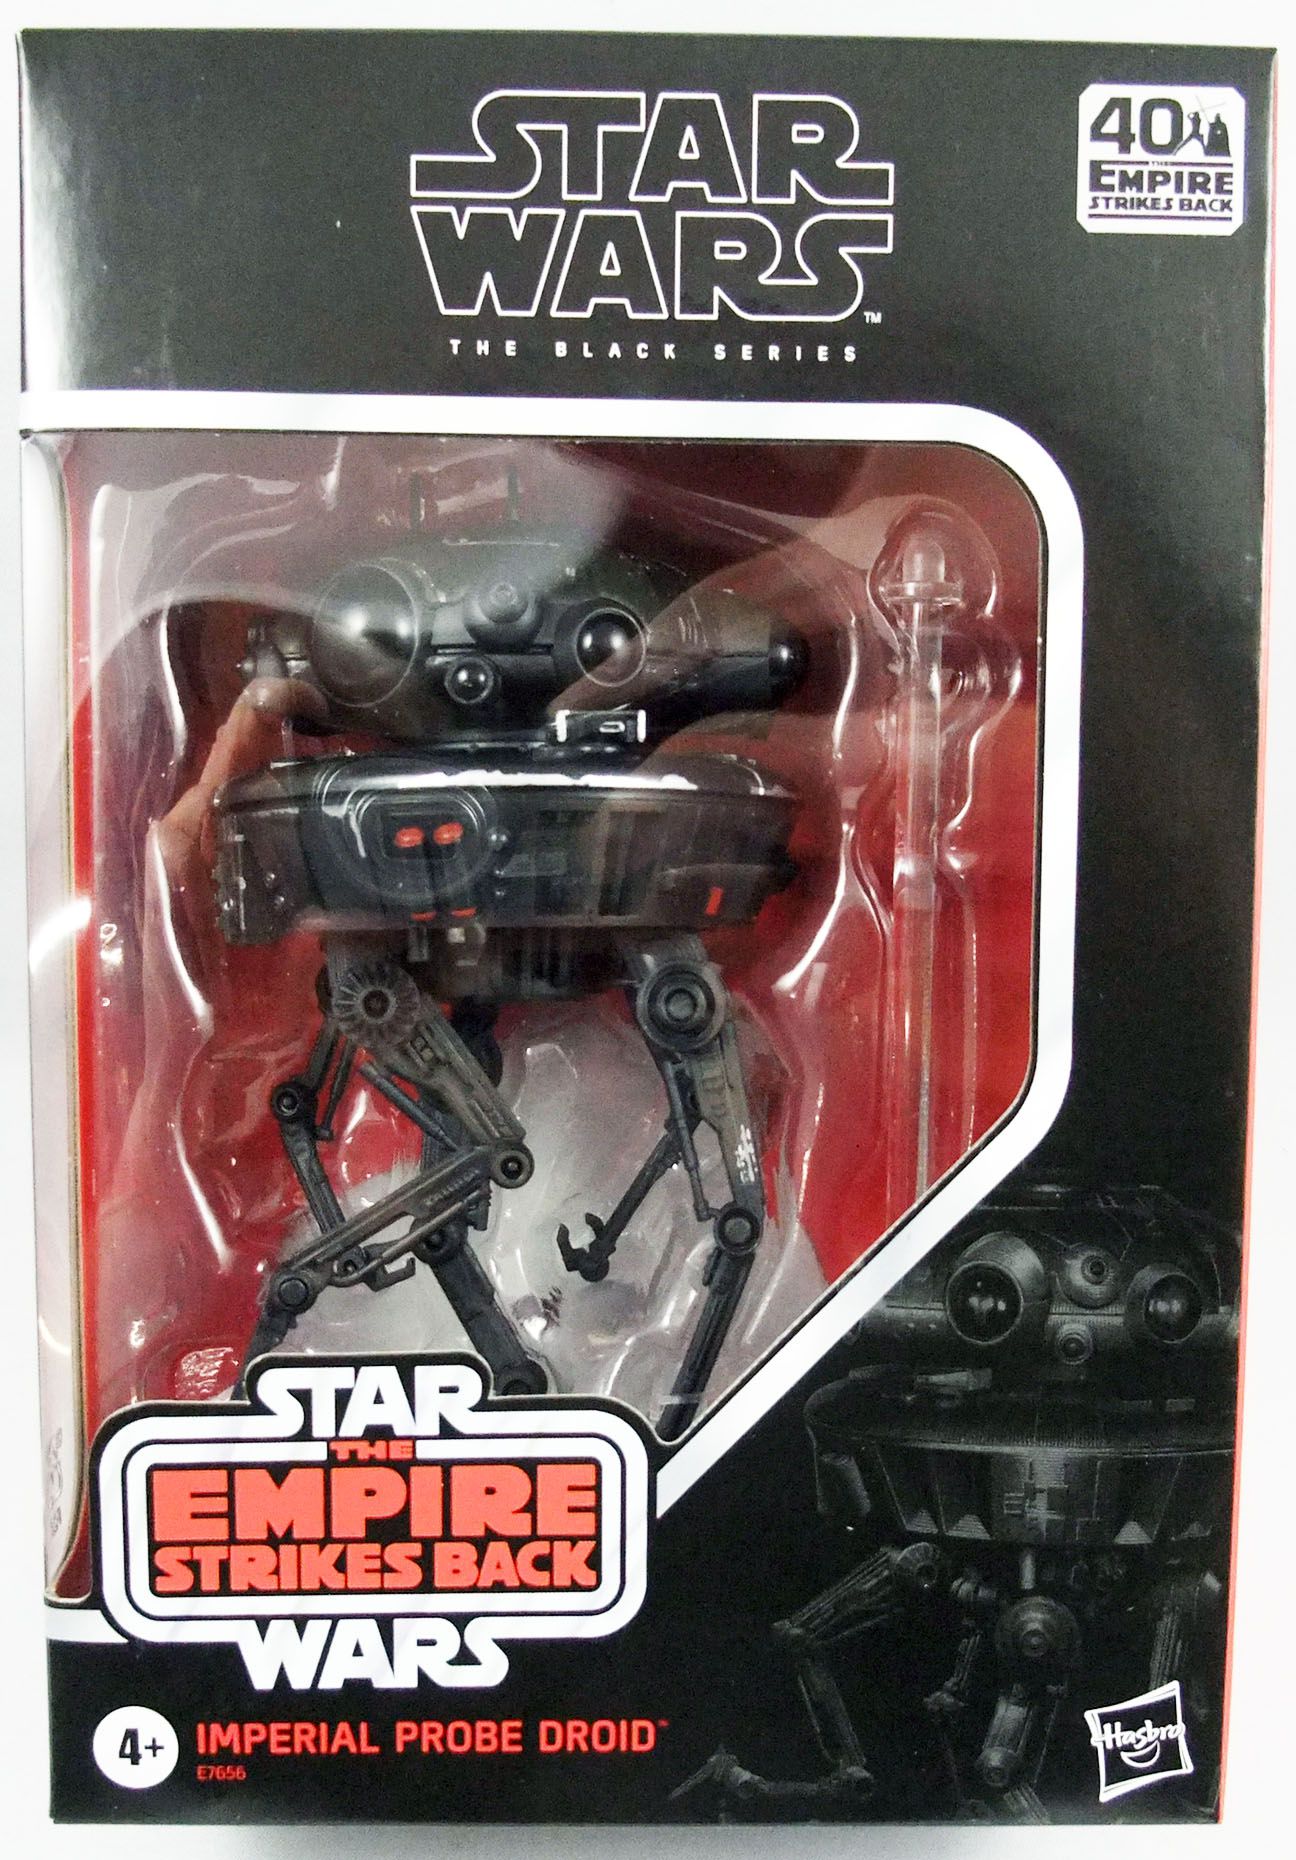 Star Wars Black Series Imperial Probe Droid 6" Action Figure 